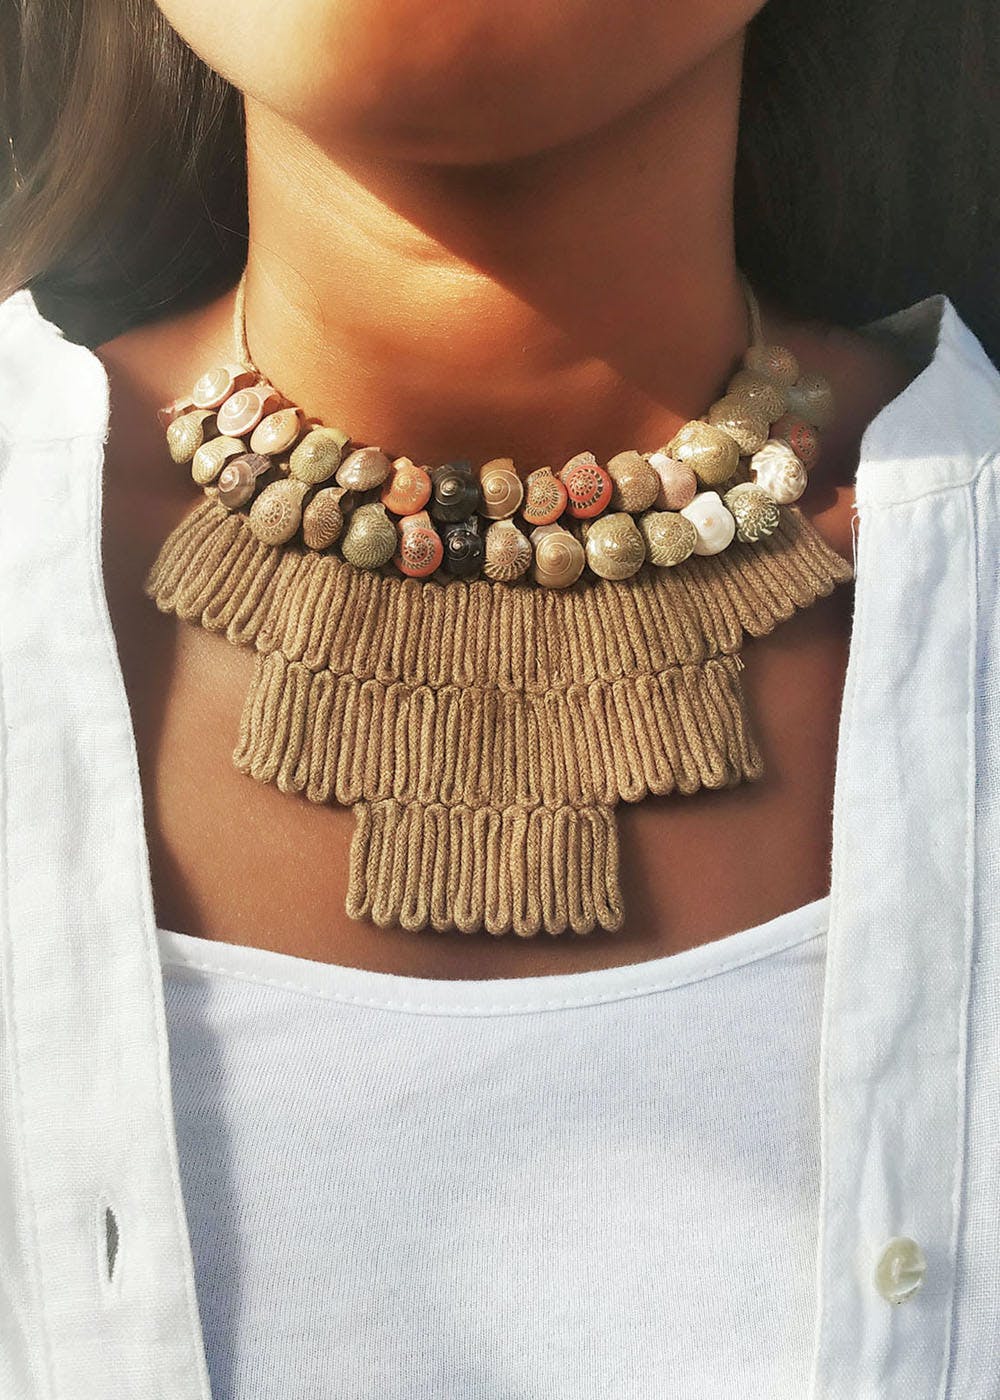 Necklace,Neck,Jewellery,Fashion accessory,Beige,Turquoise